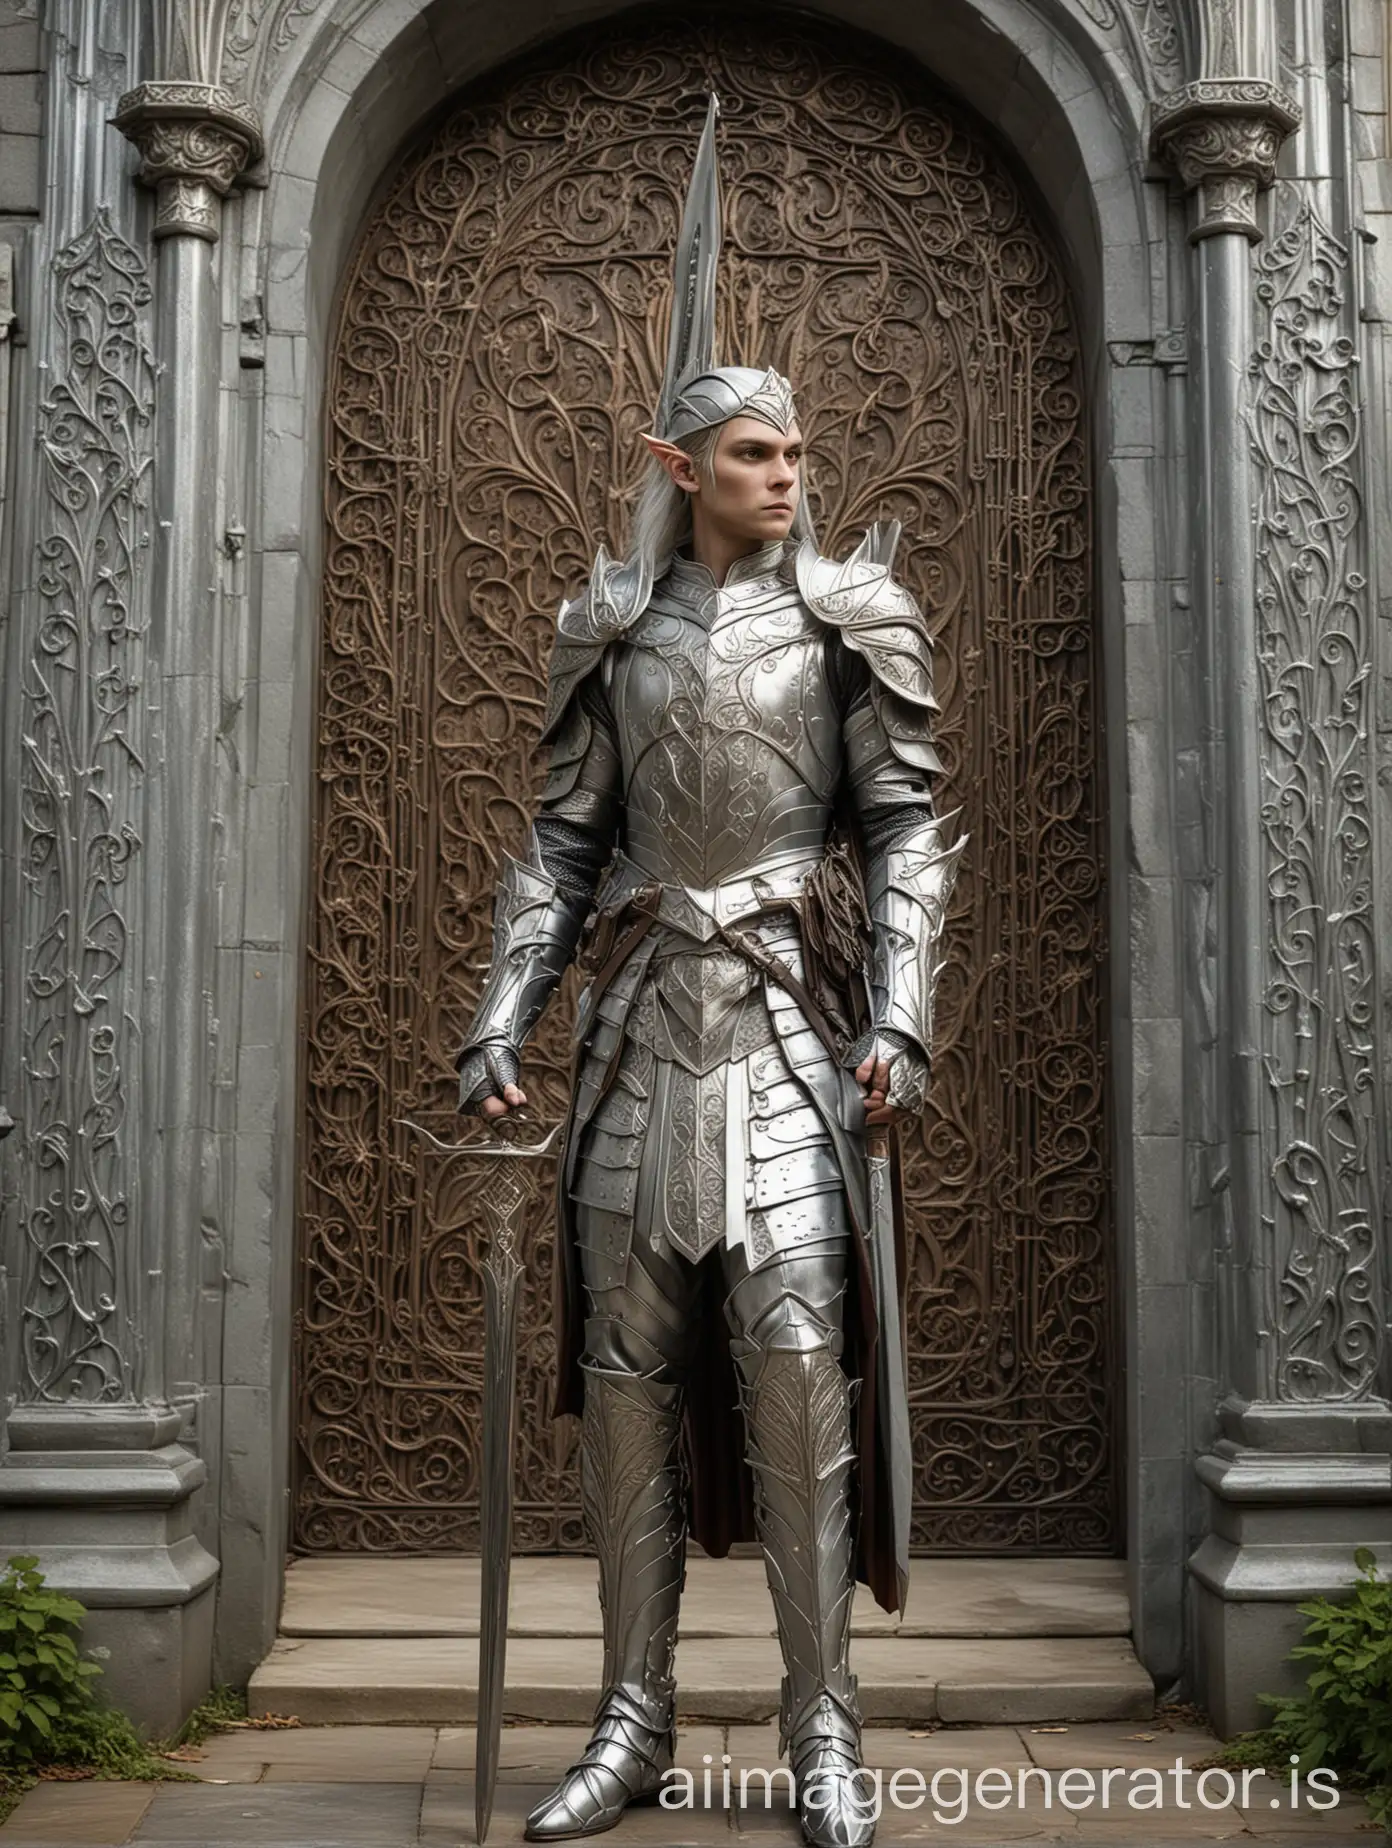 Elven-Royal-Guard-in-Gleaming-Silver-Armor-at-Palace-Gates